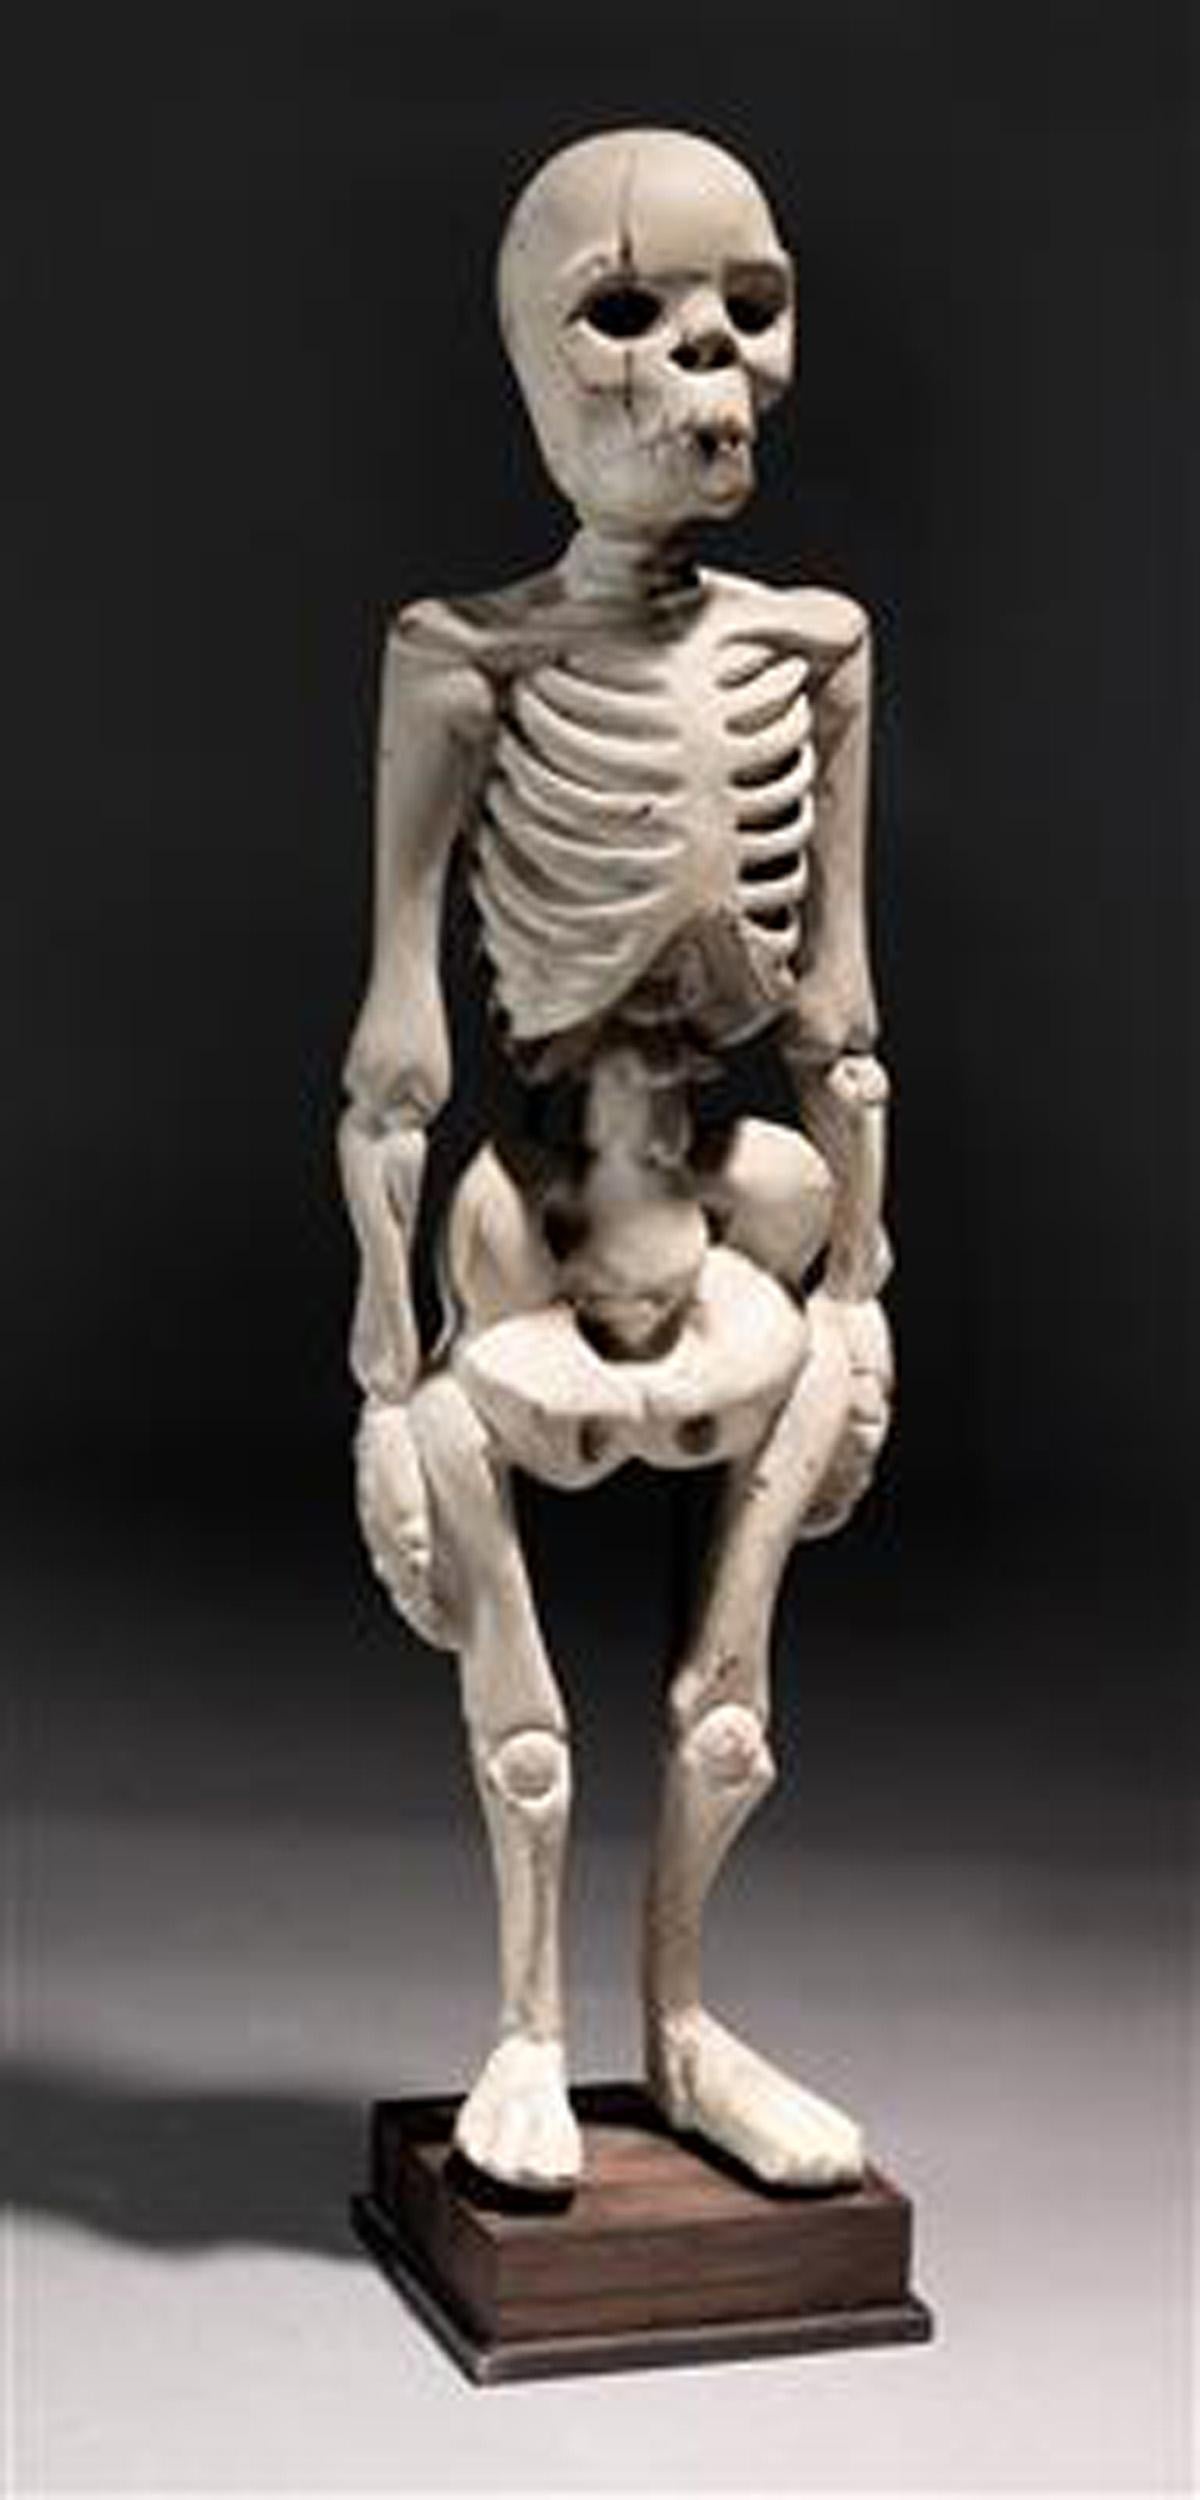 The highly expressive wooden skeleton was carved and polychromed in the early 20th century in Burma, today's Myanmar. Unlike many sculptures from that region, his one is not directly based on Buddhist iconography. 